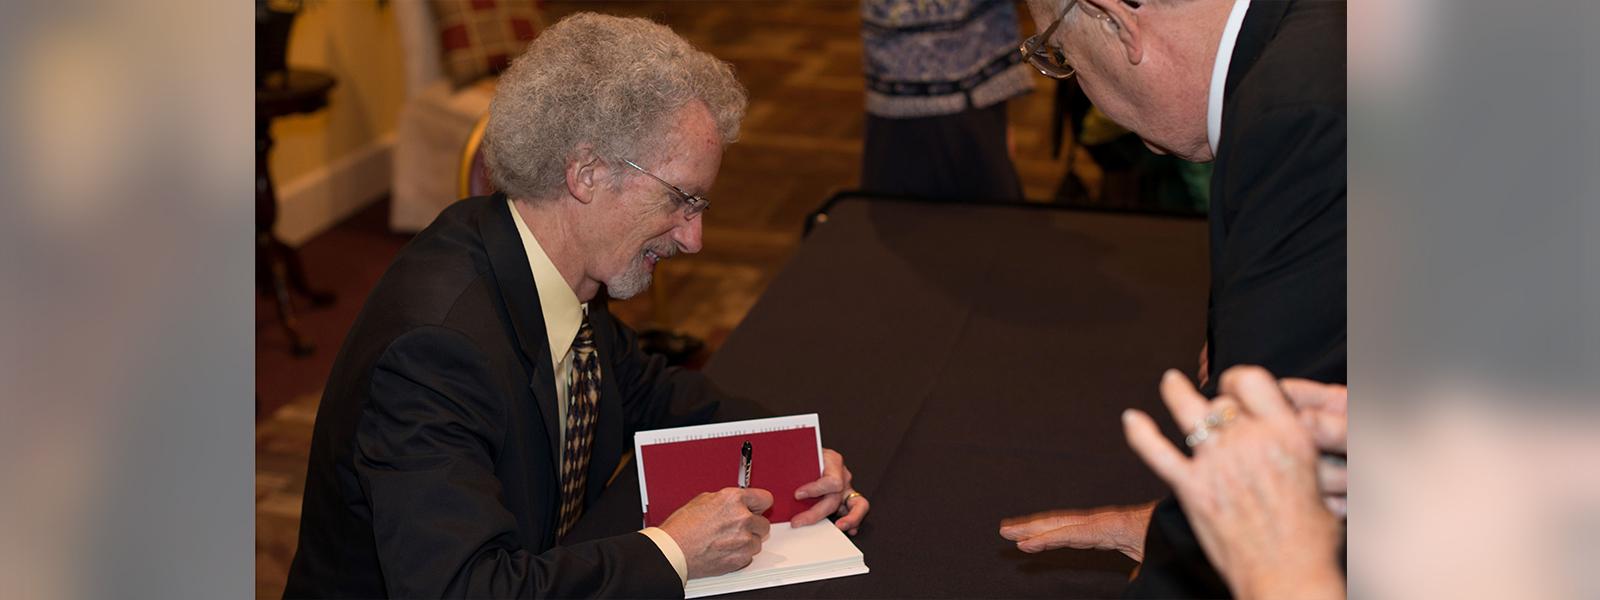 Phillip Yancey signs one of his books at the 90th anniversary celebration of CIU.